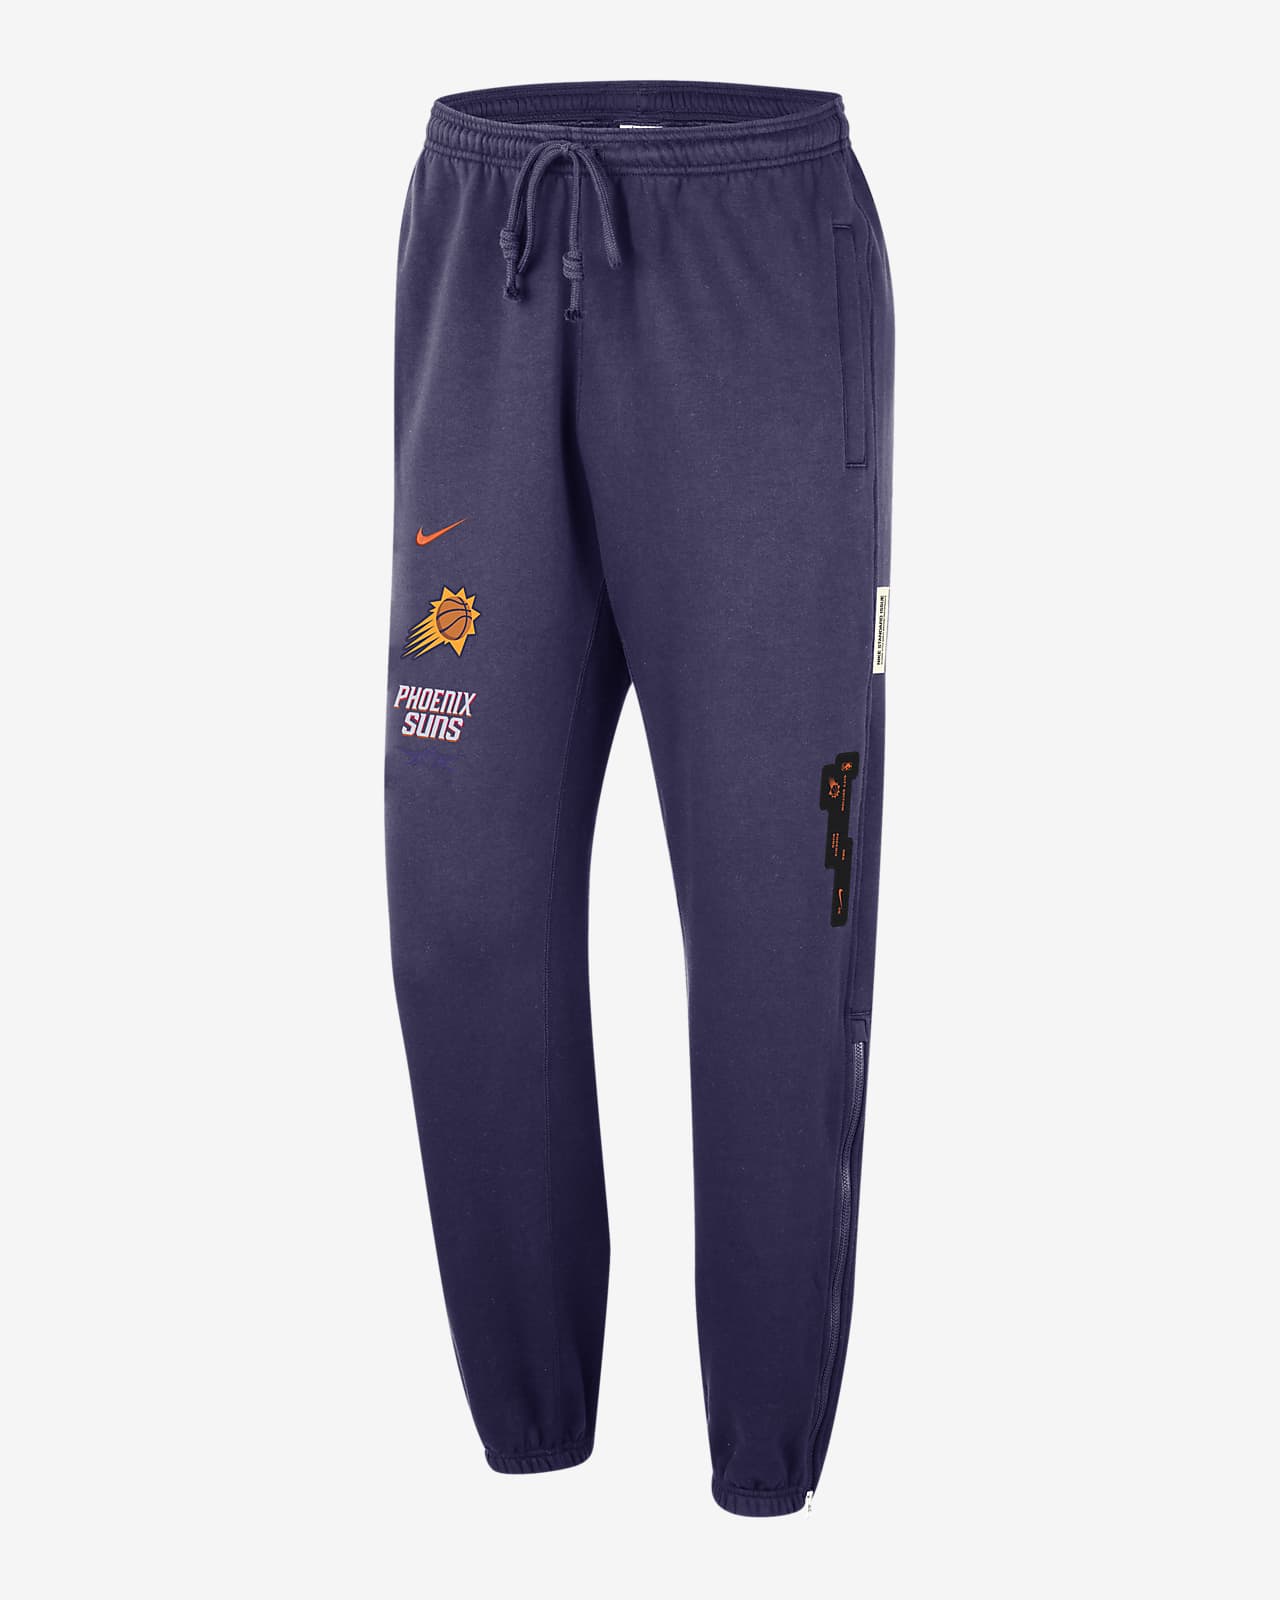 Phoenix Suns Standard Issue 2023/24 City Edition Men's Nike NBA Courtside Trousers